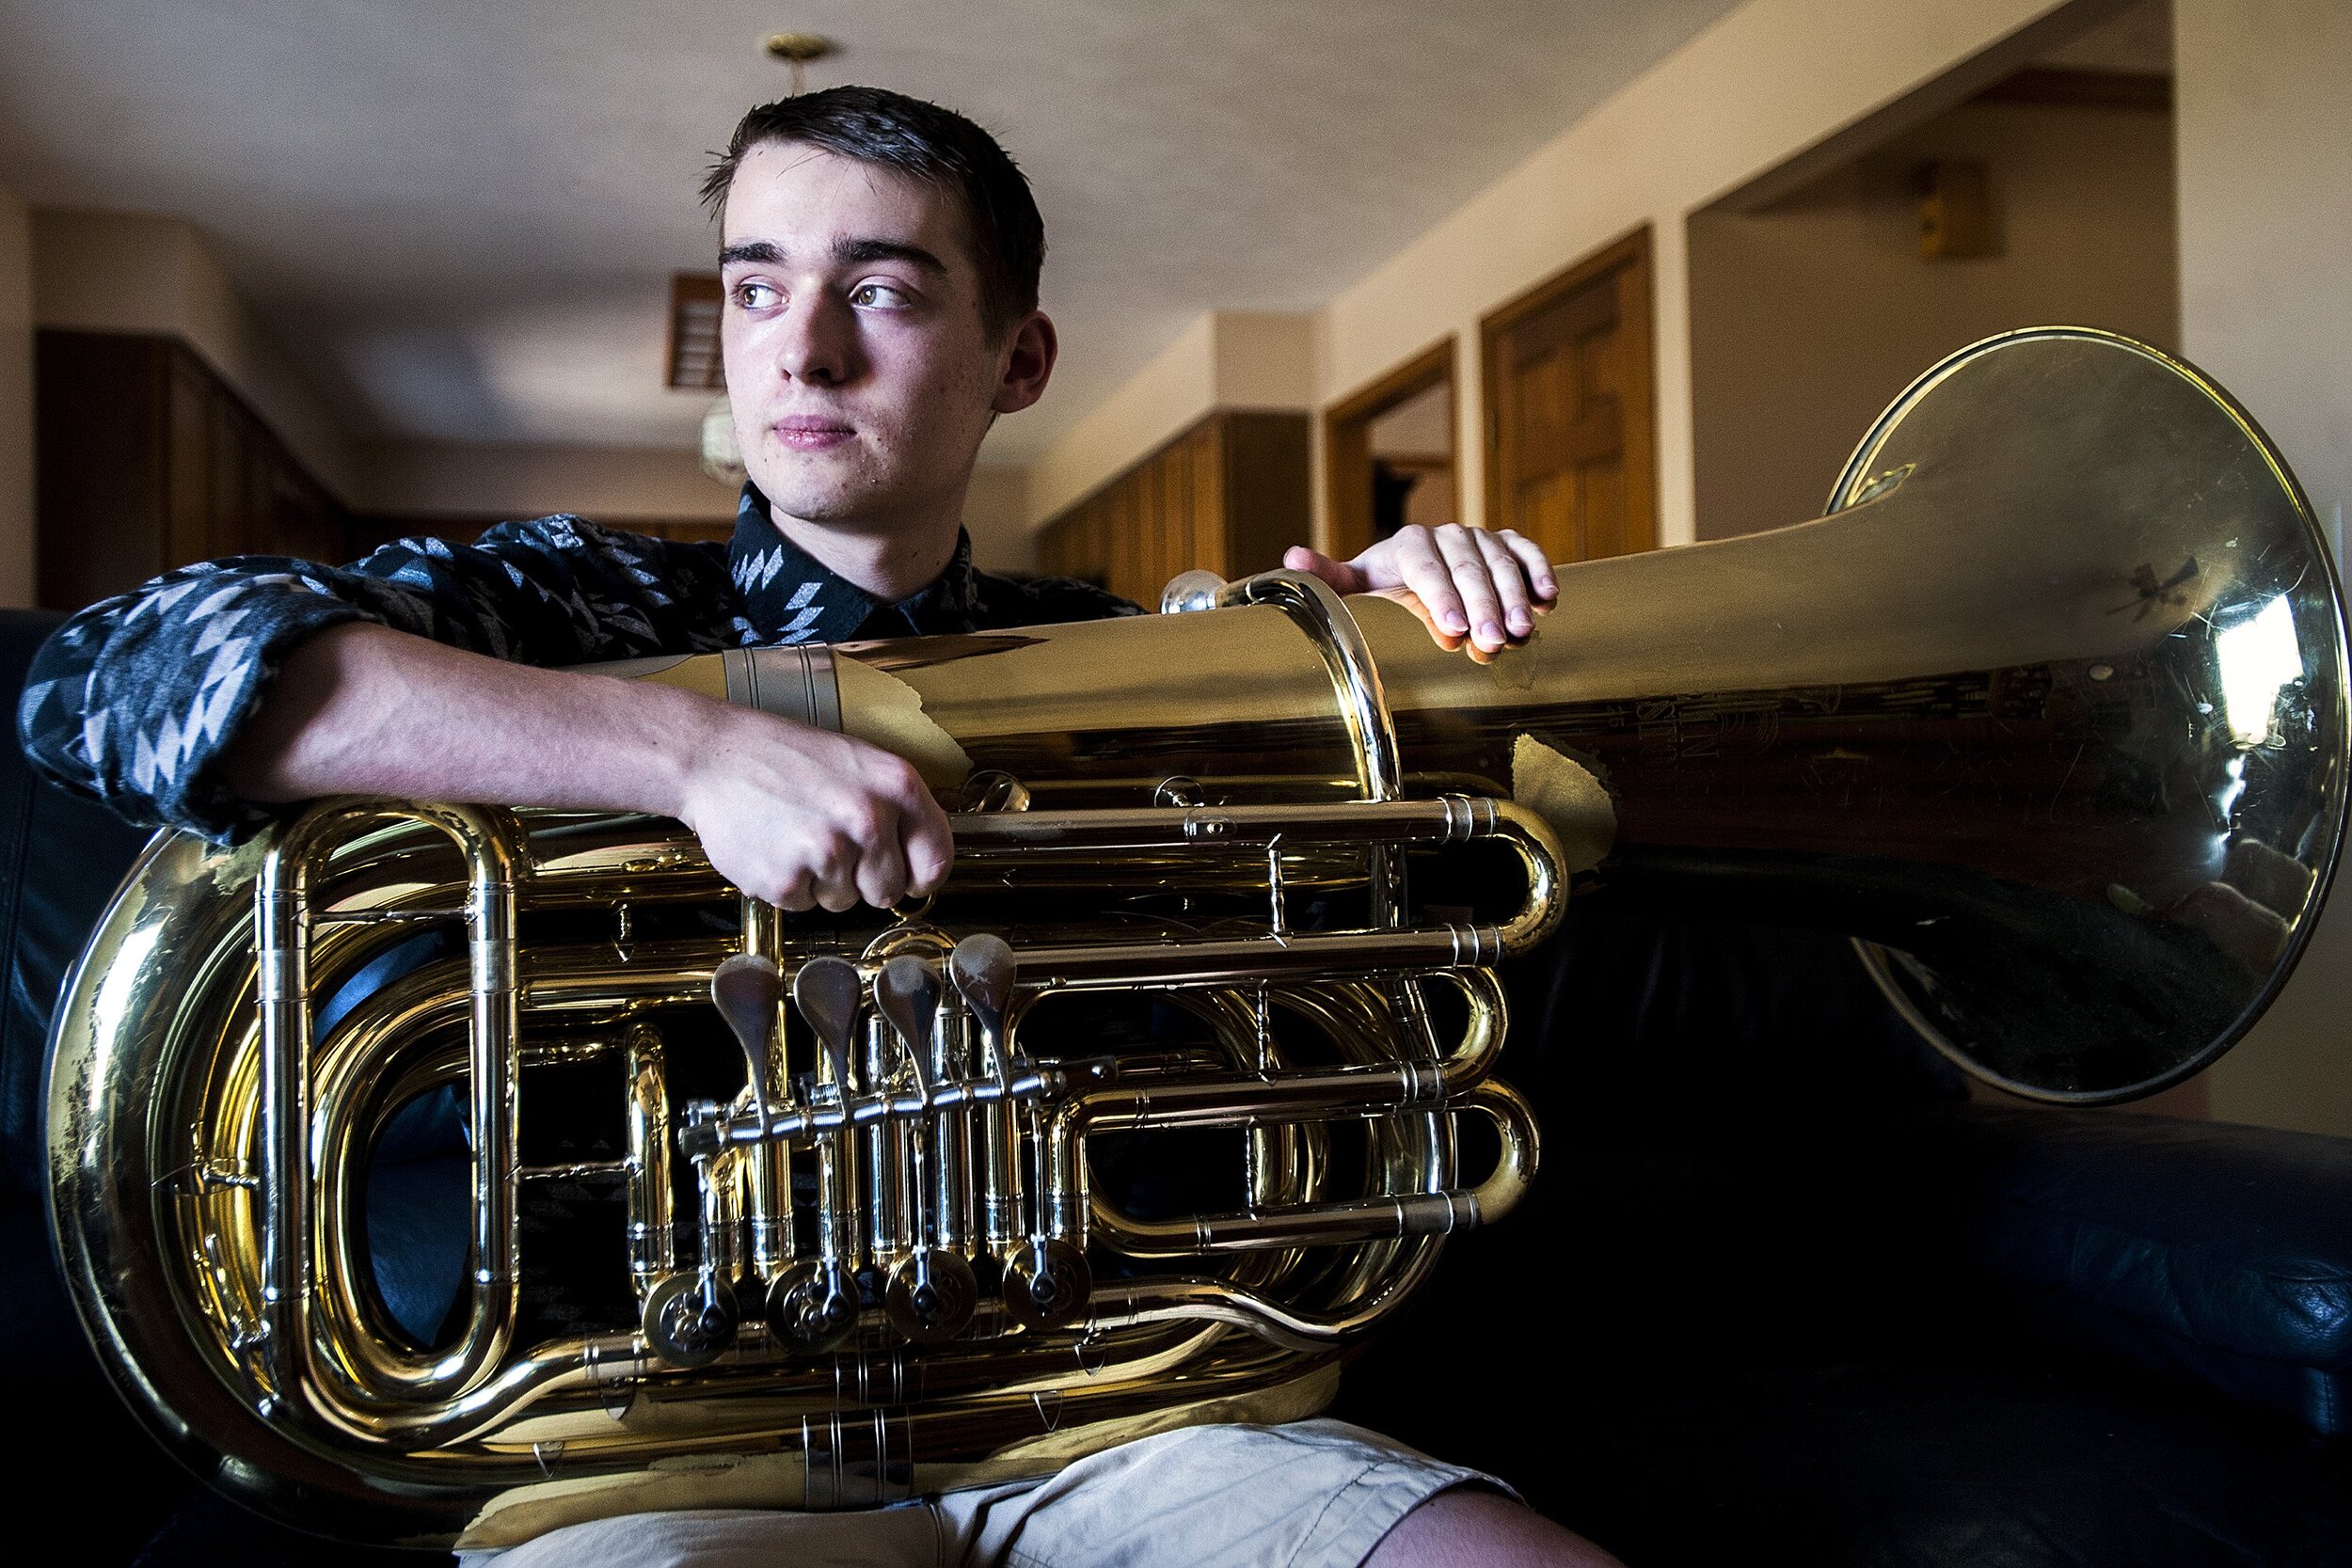  Thomas Briggs was diagnosed with Hodgkin lymphoma when he was 15. After going under countless chemotherapy and radiation sessions, the now 16-year-old has no signs of active cancer and can get back to doing what he loves, including playing tuba in N